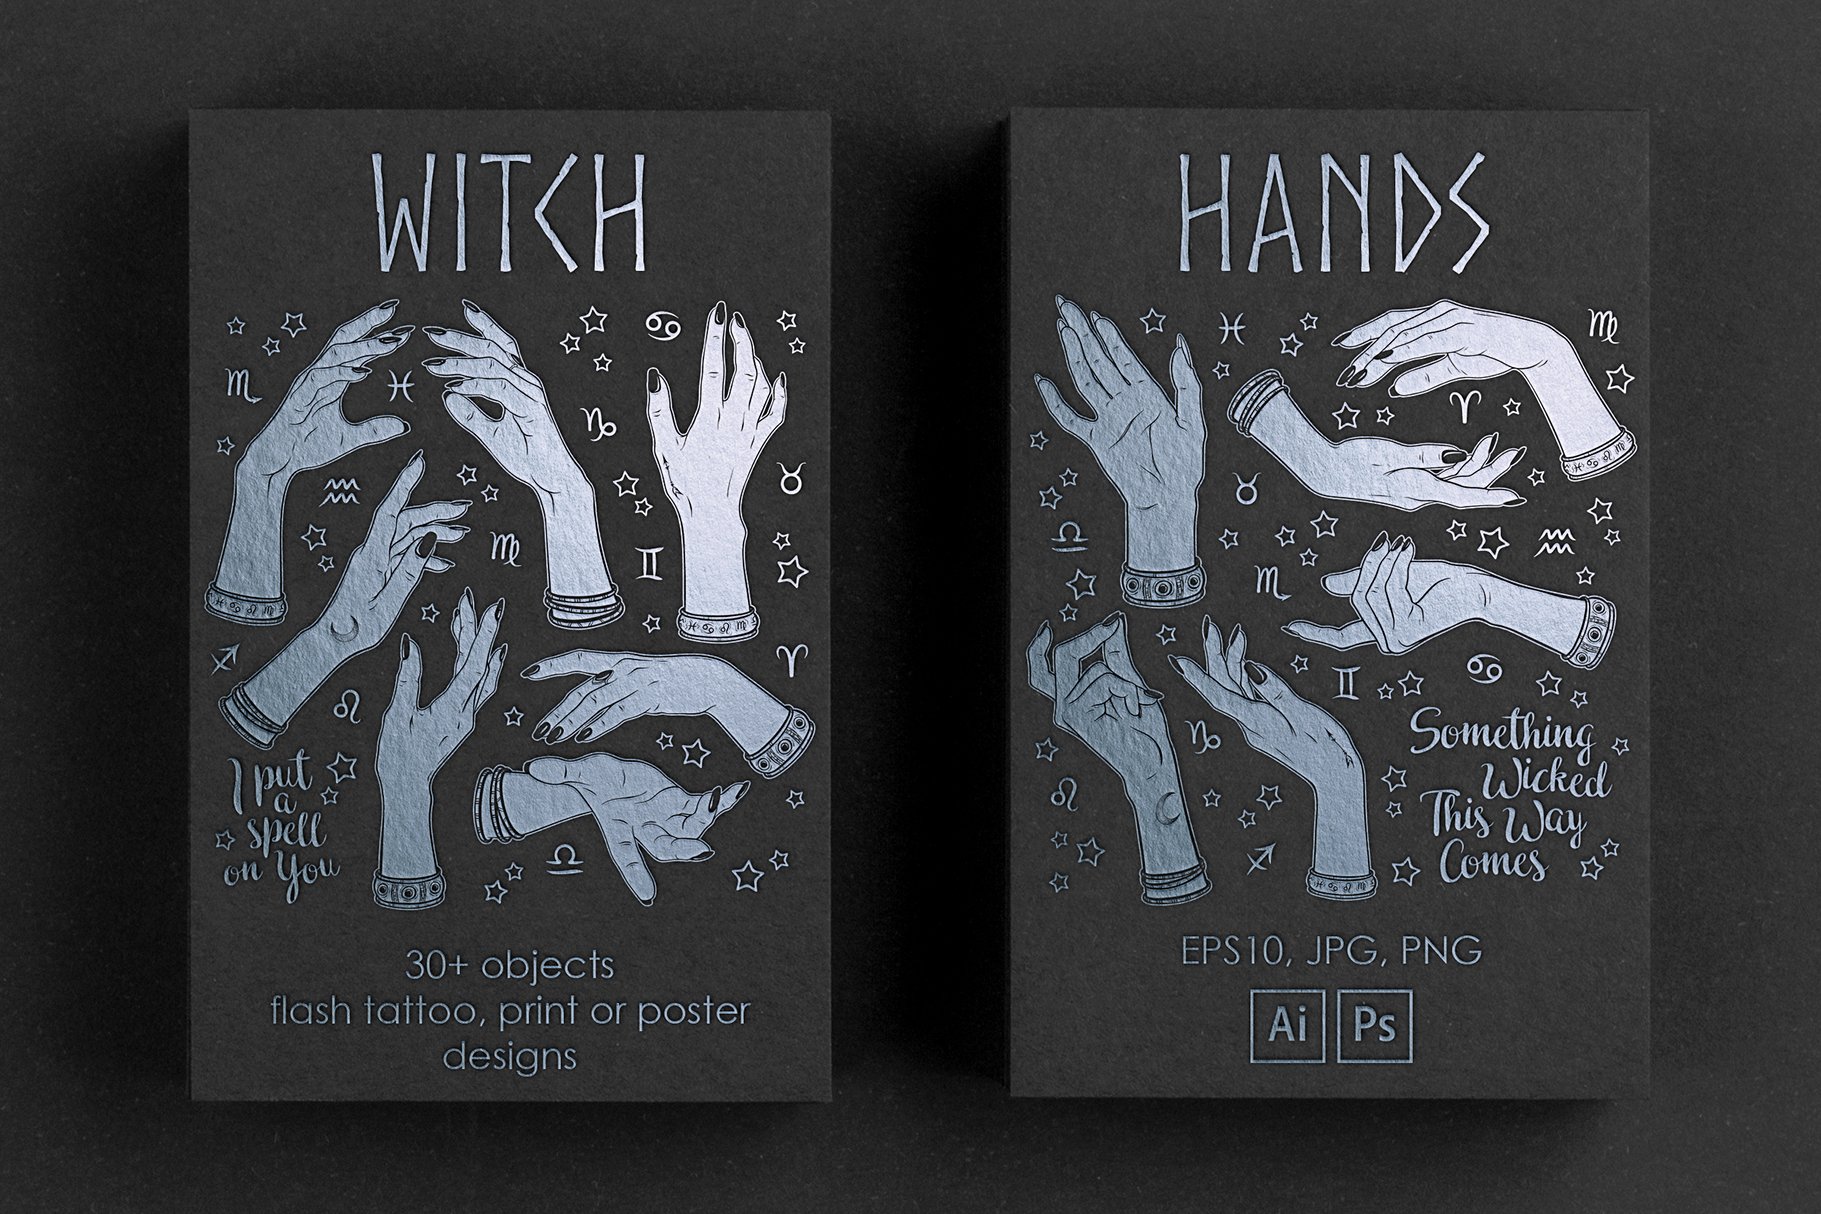 Witch Hands cover image.